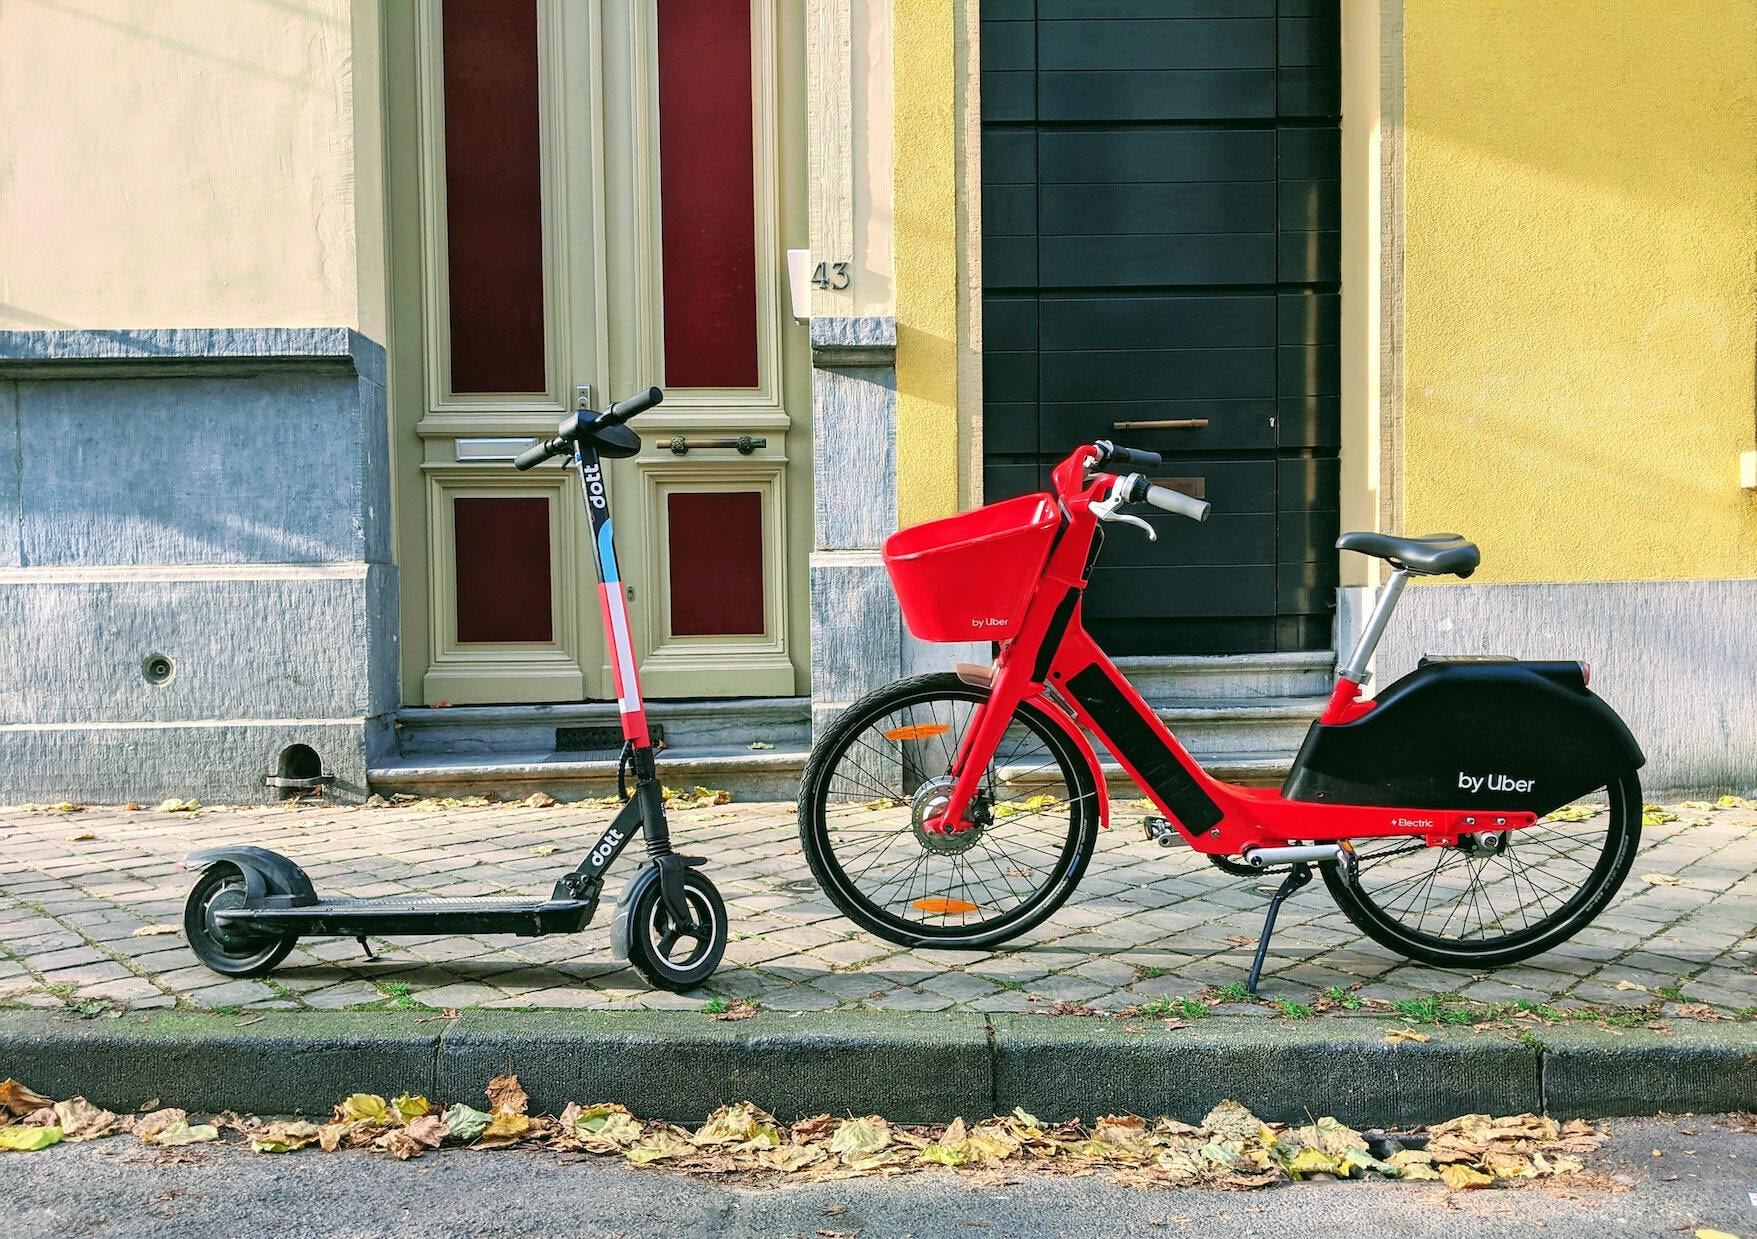 A red and blue kick-scooter and a red free-floating bike with a basket faced against each other in the middle of an empty street.